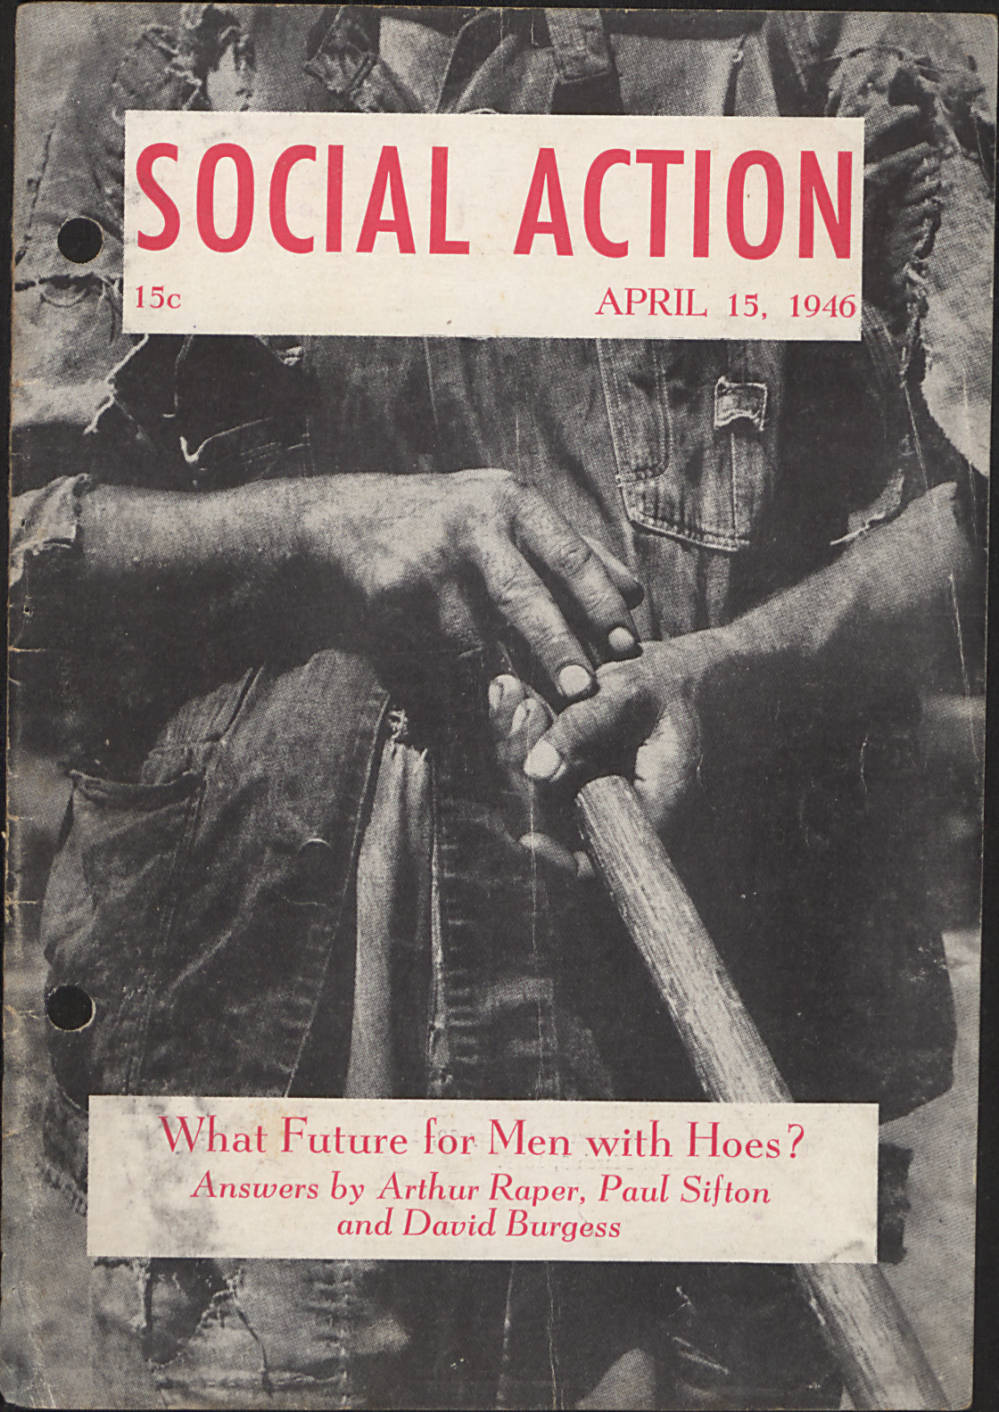 The Arthur Franklin Raper papers have many publications about social justice.